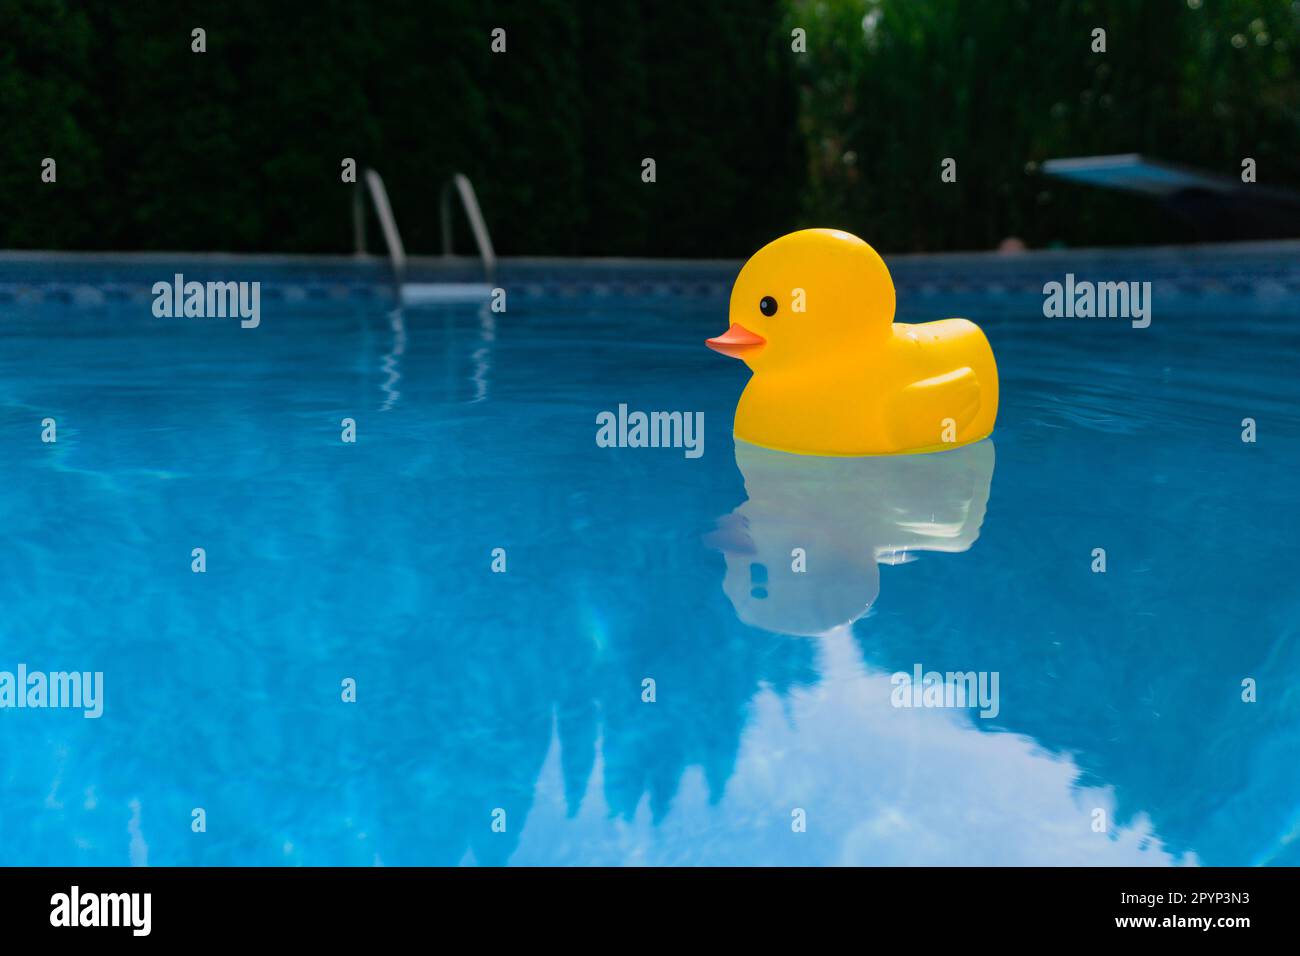 Low angle view of a toy yellow rubber duck floating in swimming pool outdoors Stock Photo